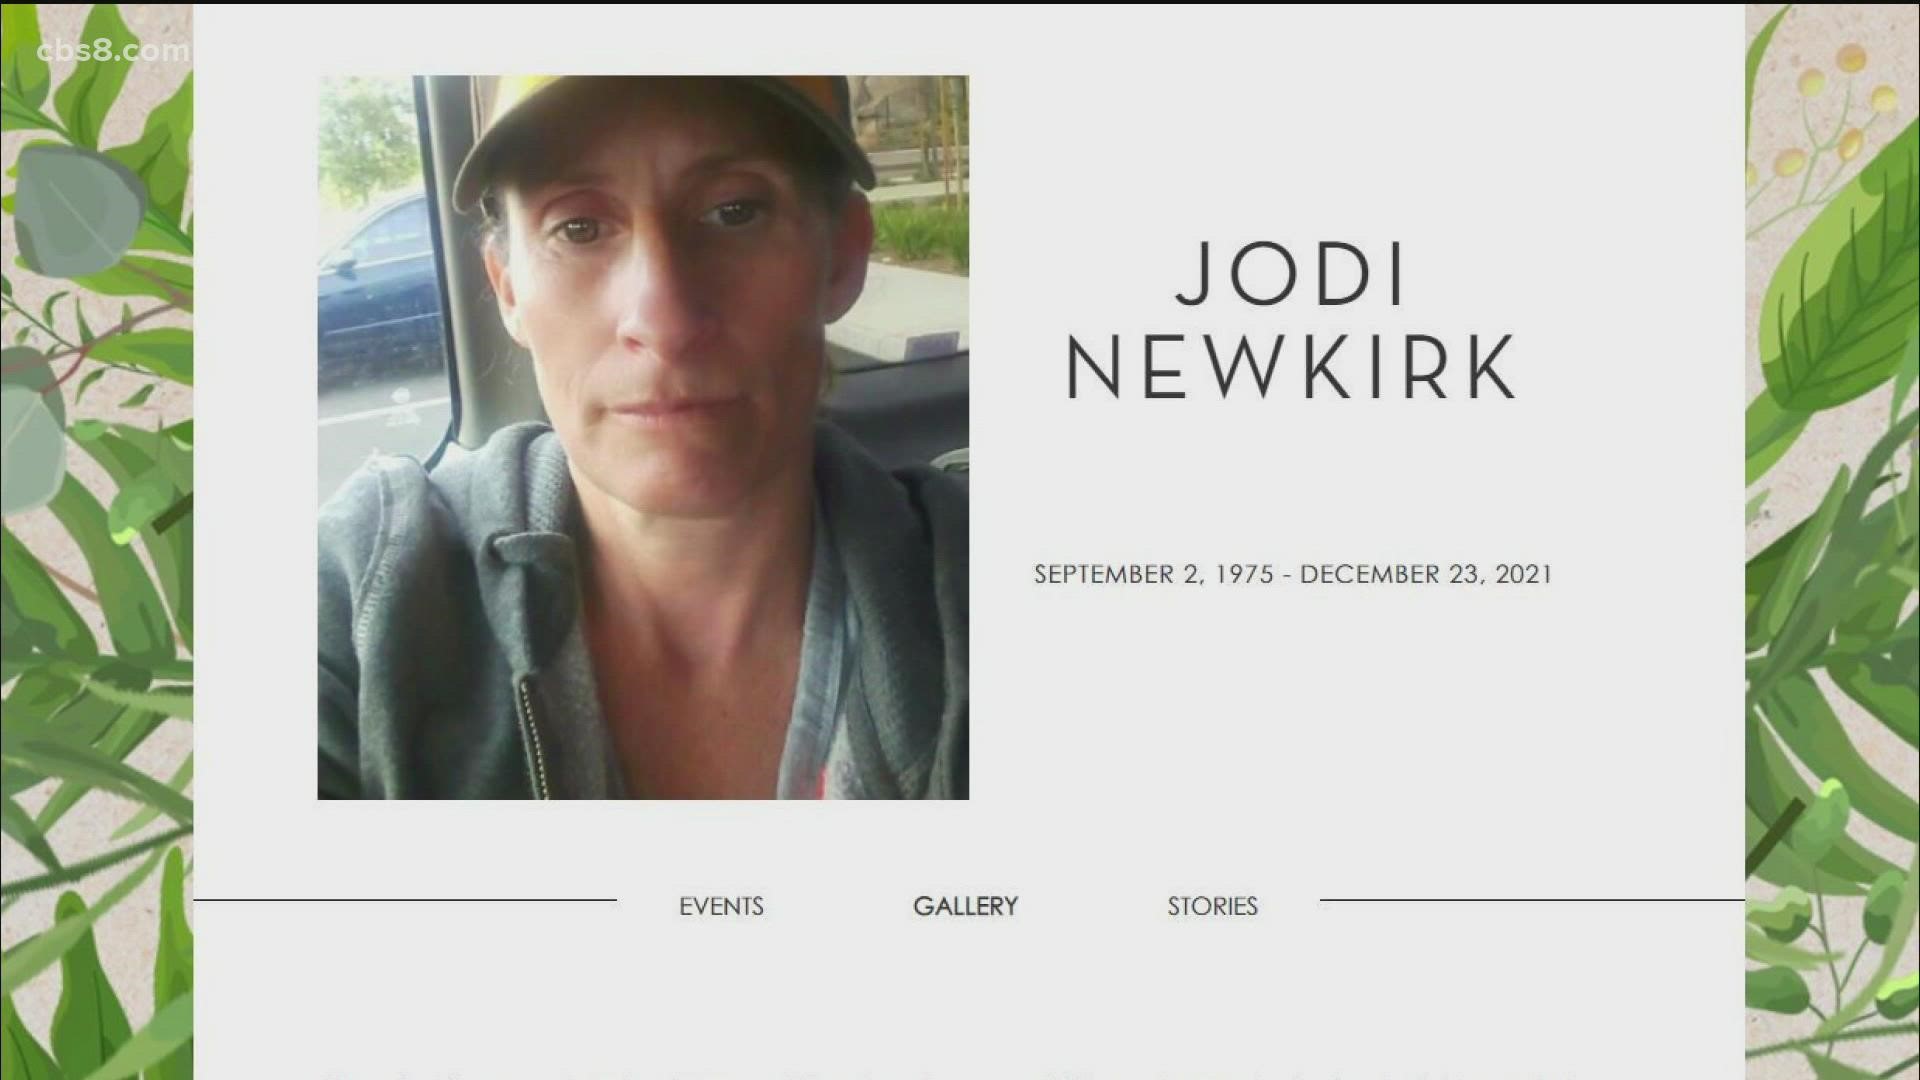 Jodi Newkirk, 46, died at the ranch on Dec. 23, 2021. Ranch owner Dia Abrams went missing on June 6, 2020.